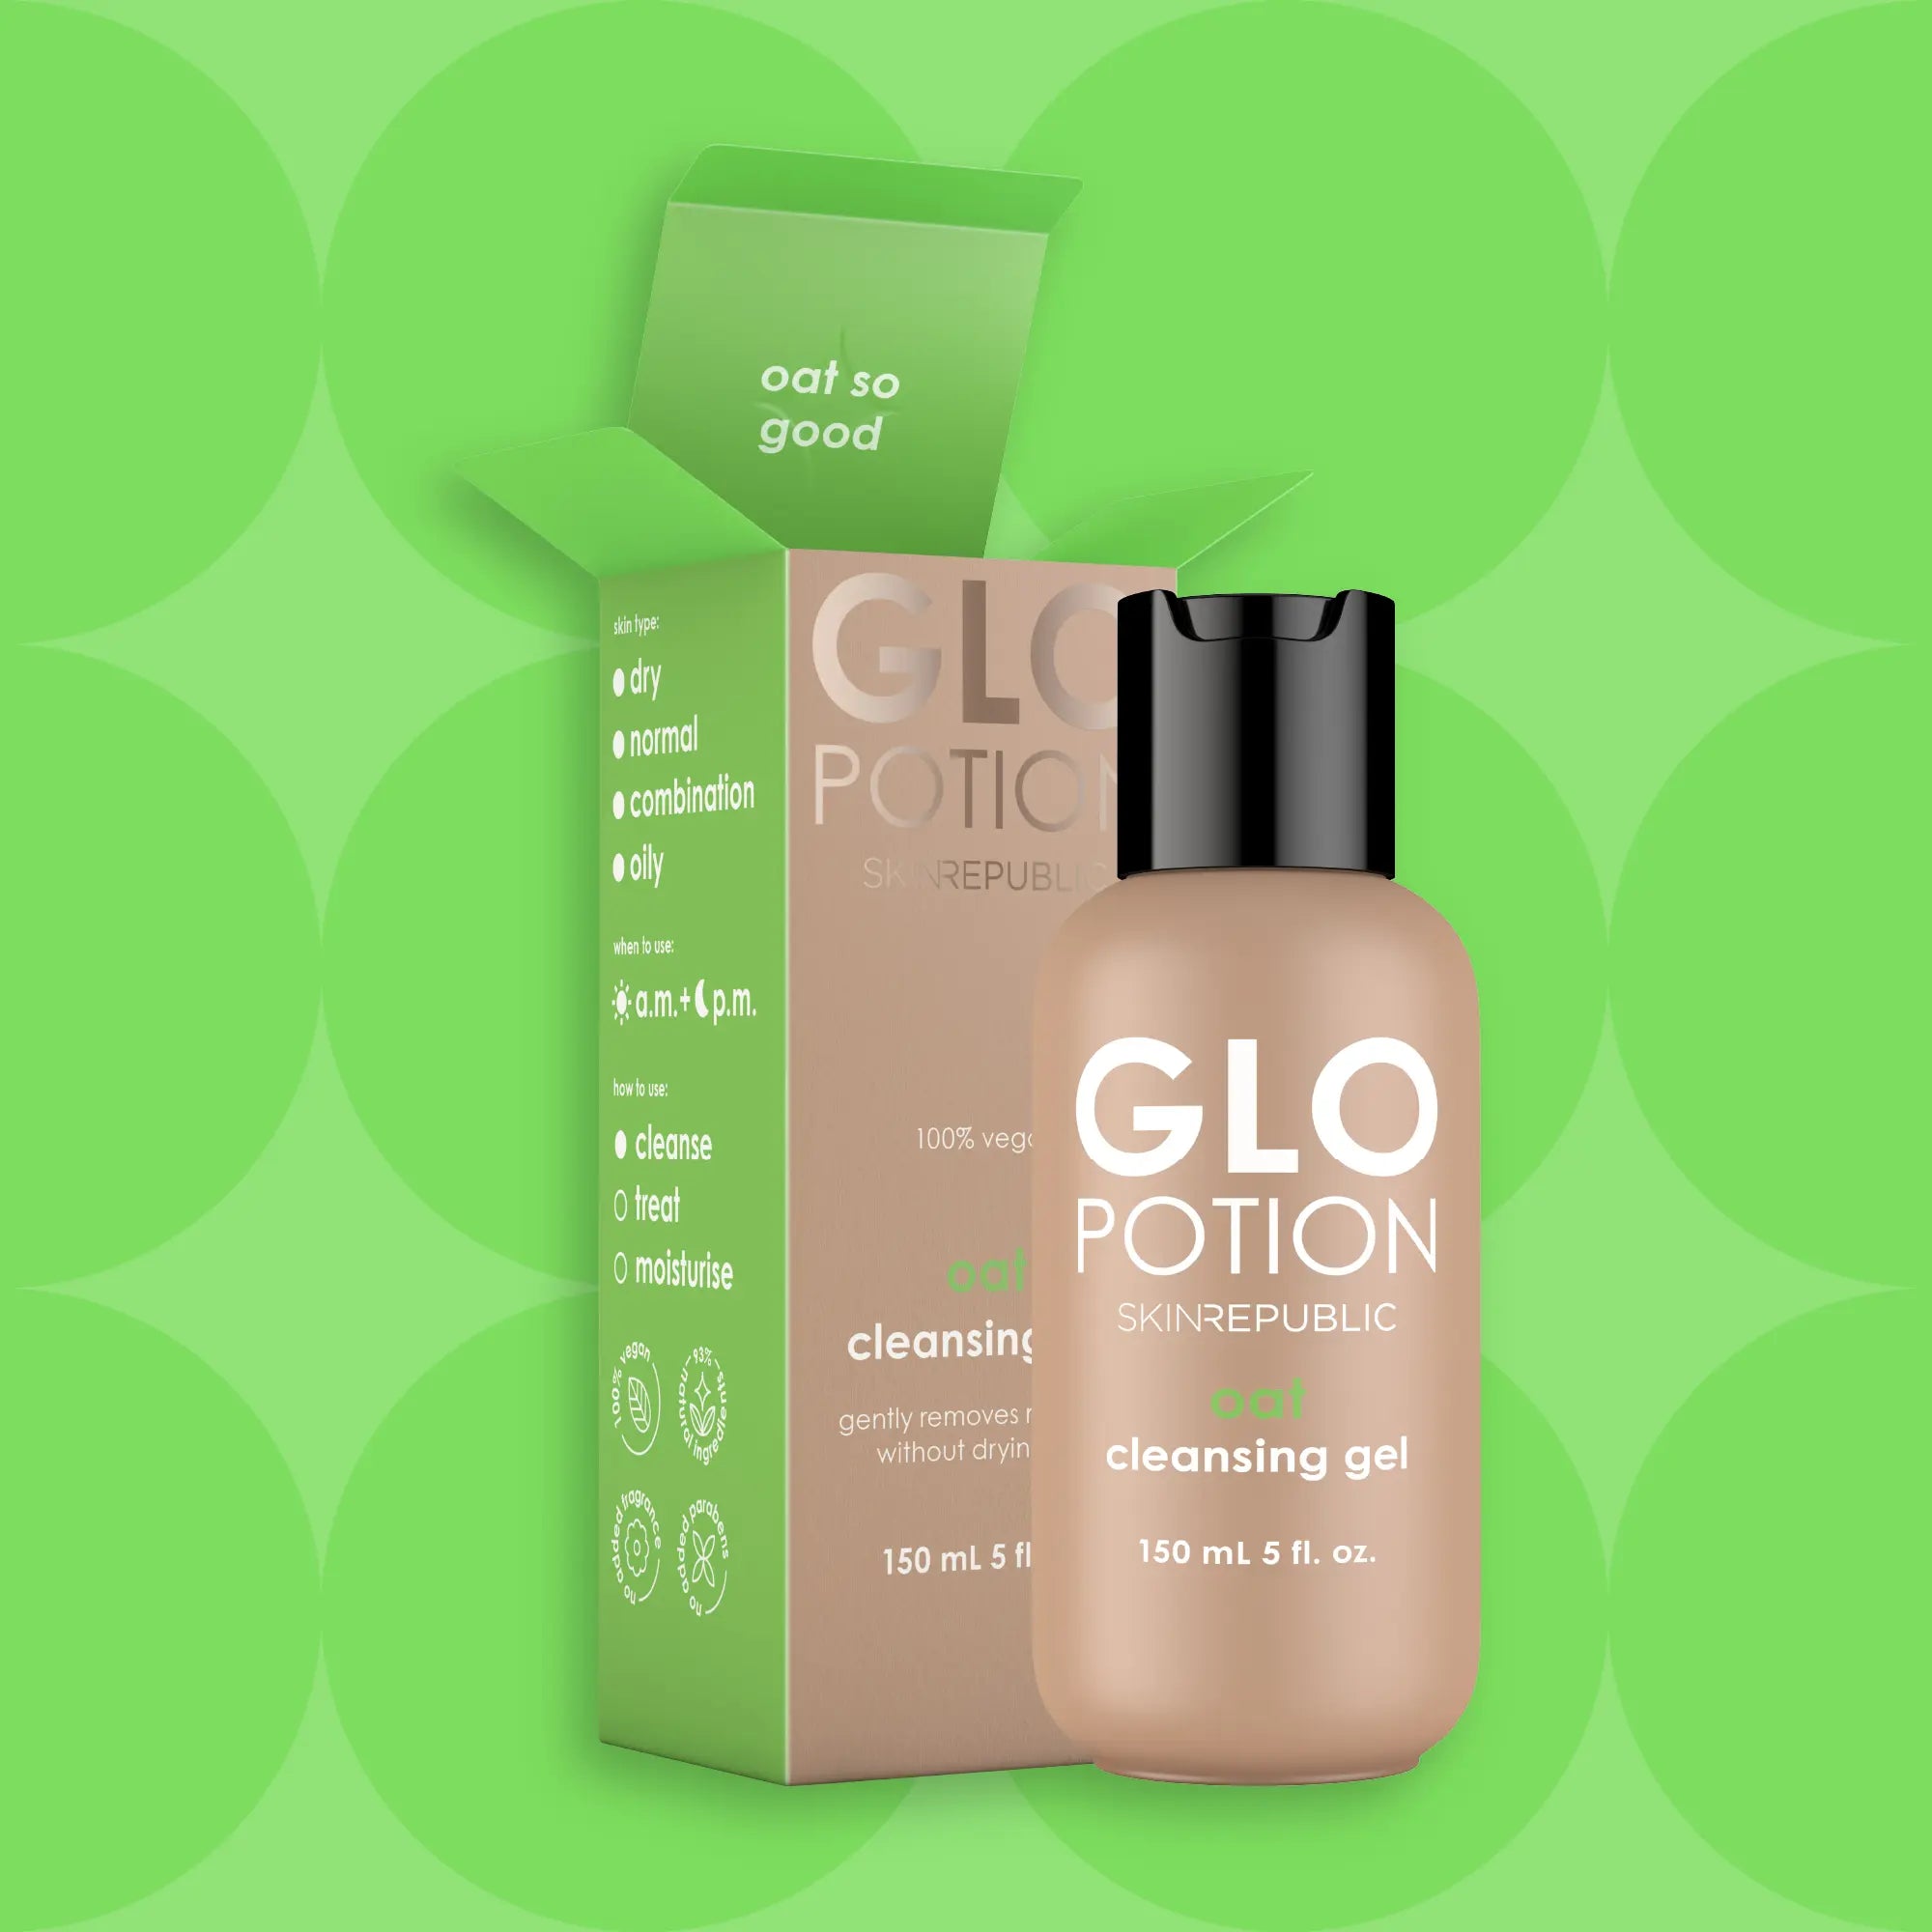 GloPotion oat cleansing gel